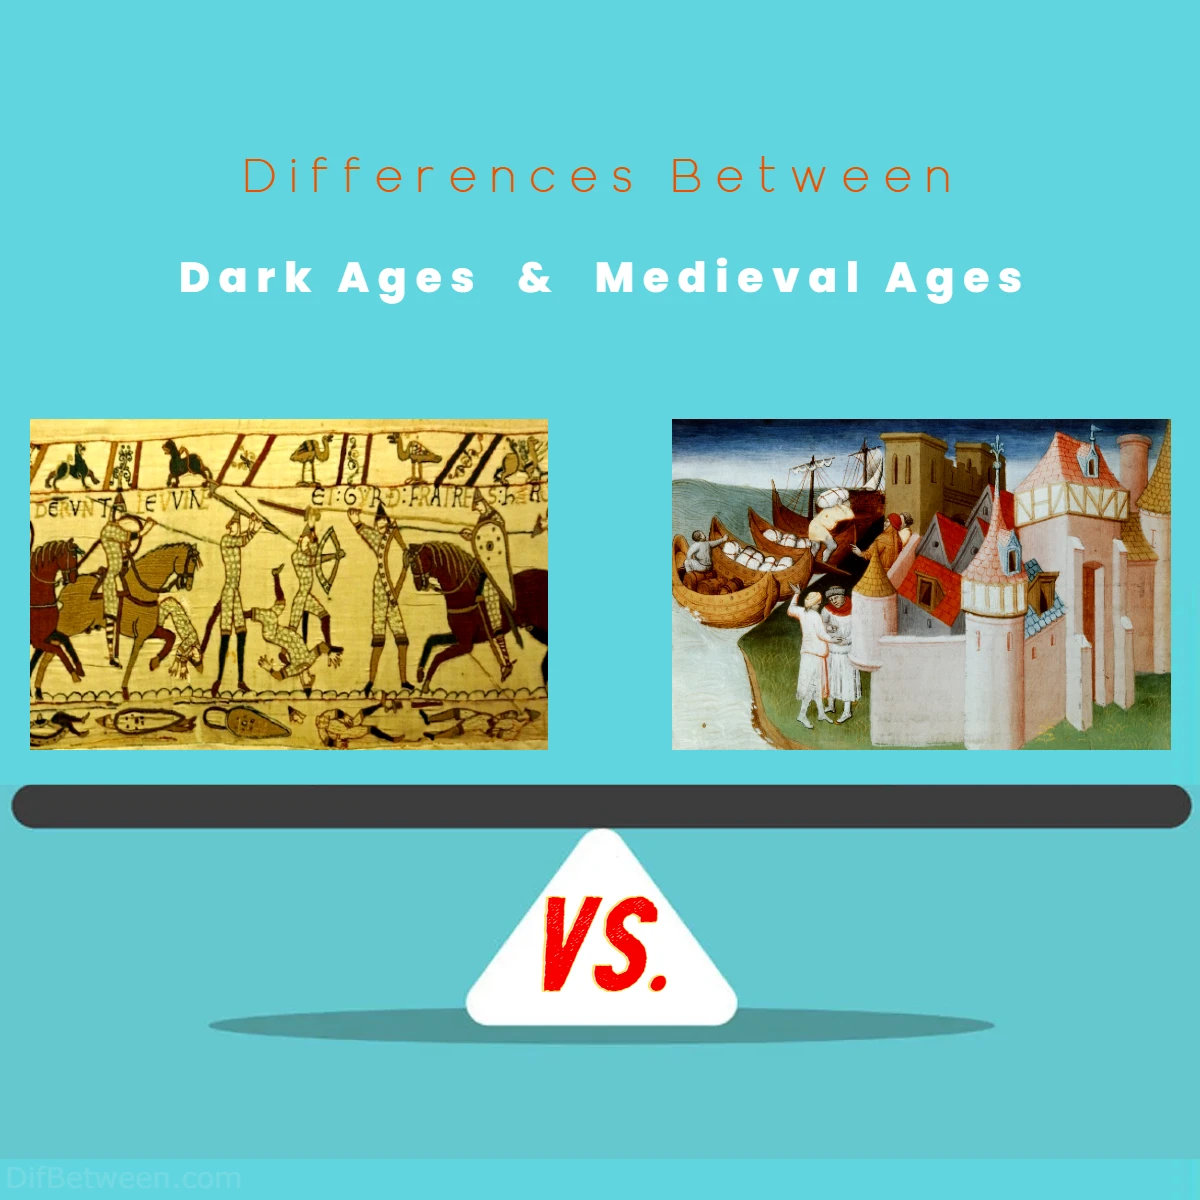 Differences Between Dark Ages vs Medieval Ages